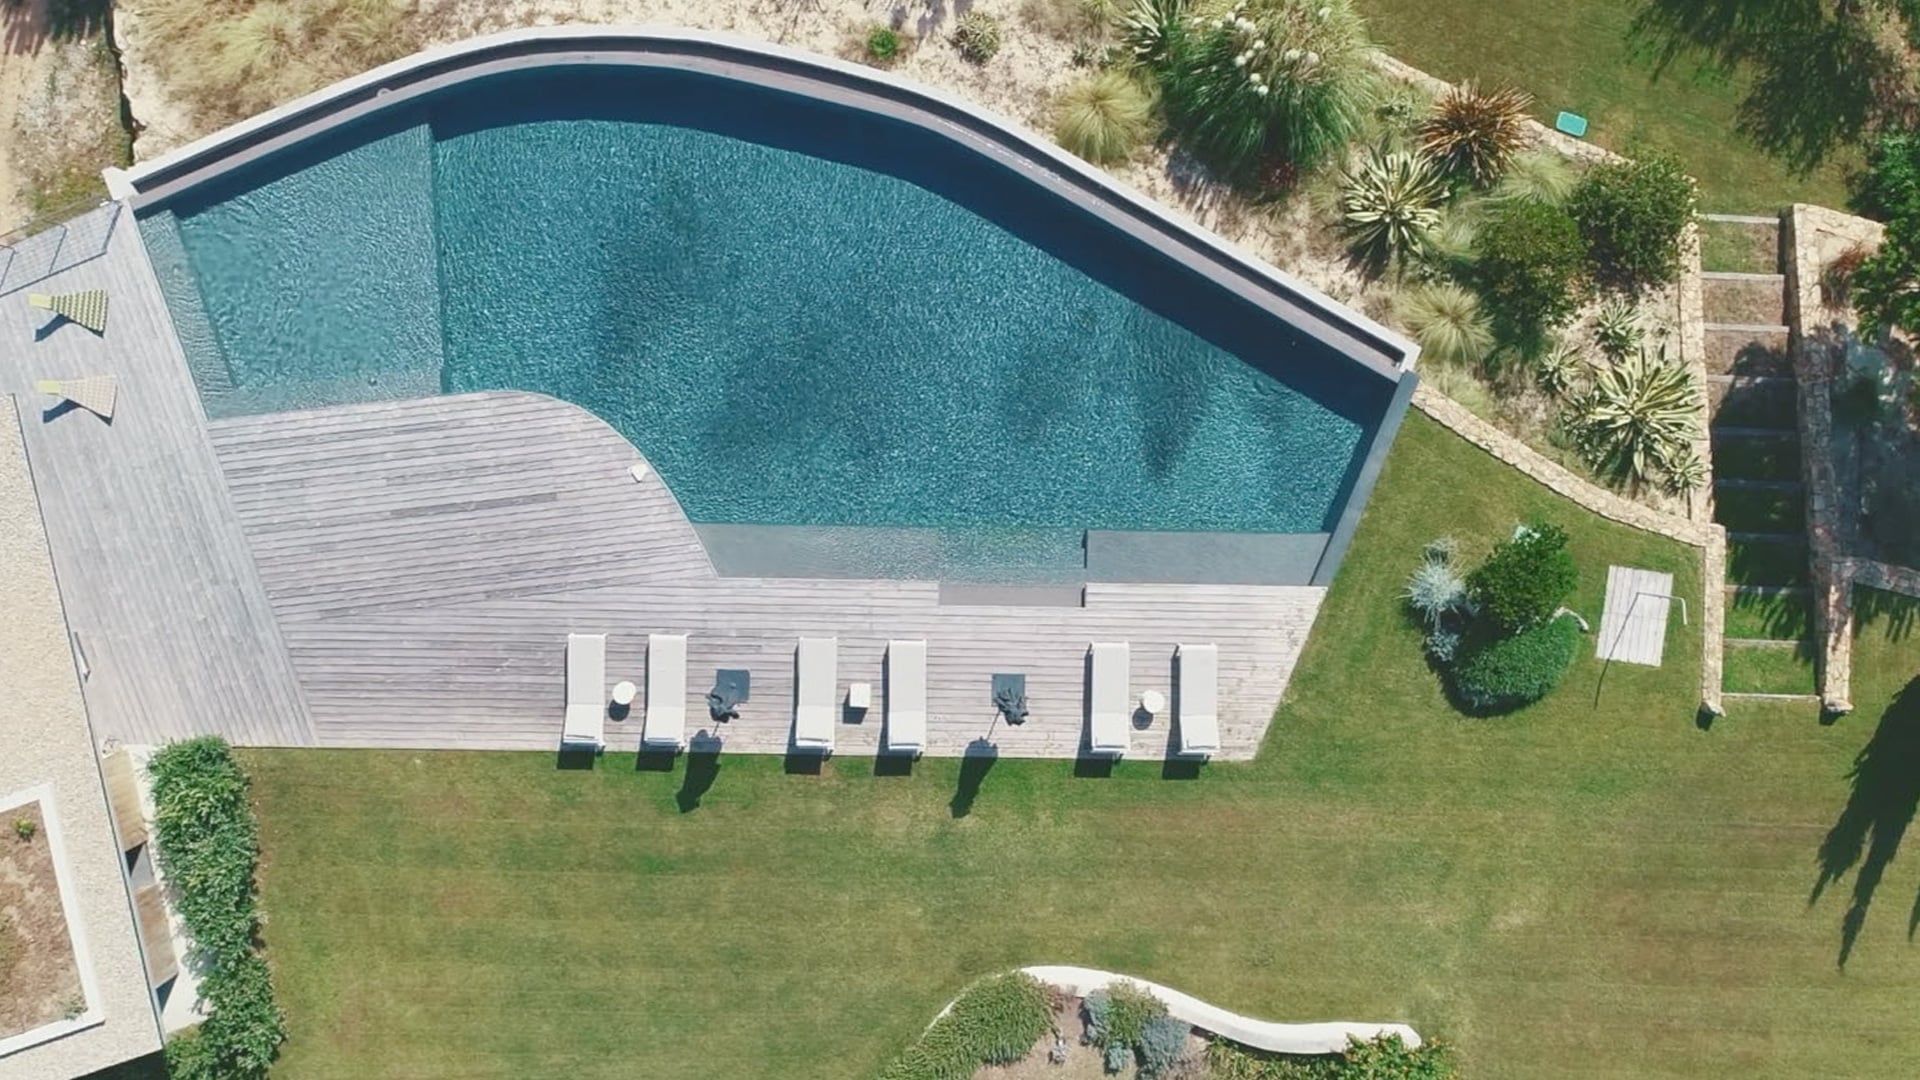 Corsica: a beautiful architect-designed house for a family holiday - Vimeo thumbnail